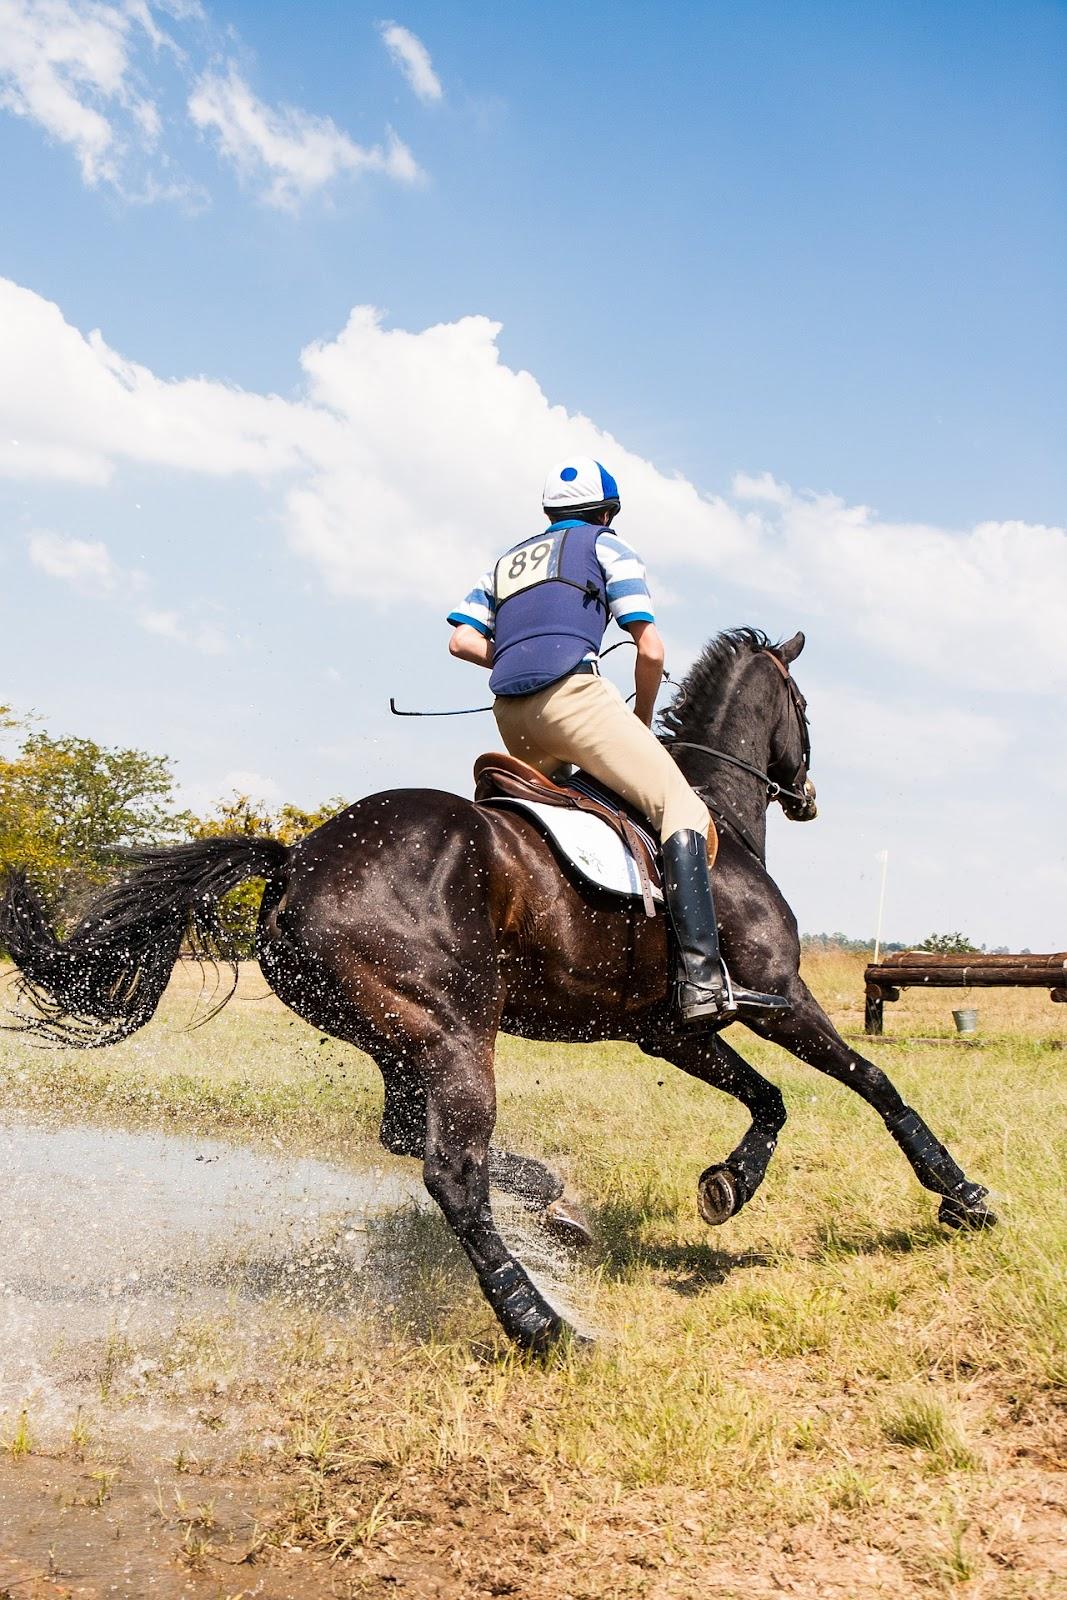 Eventing rider galloping on a dark bay horse adopts a half seat position.